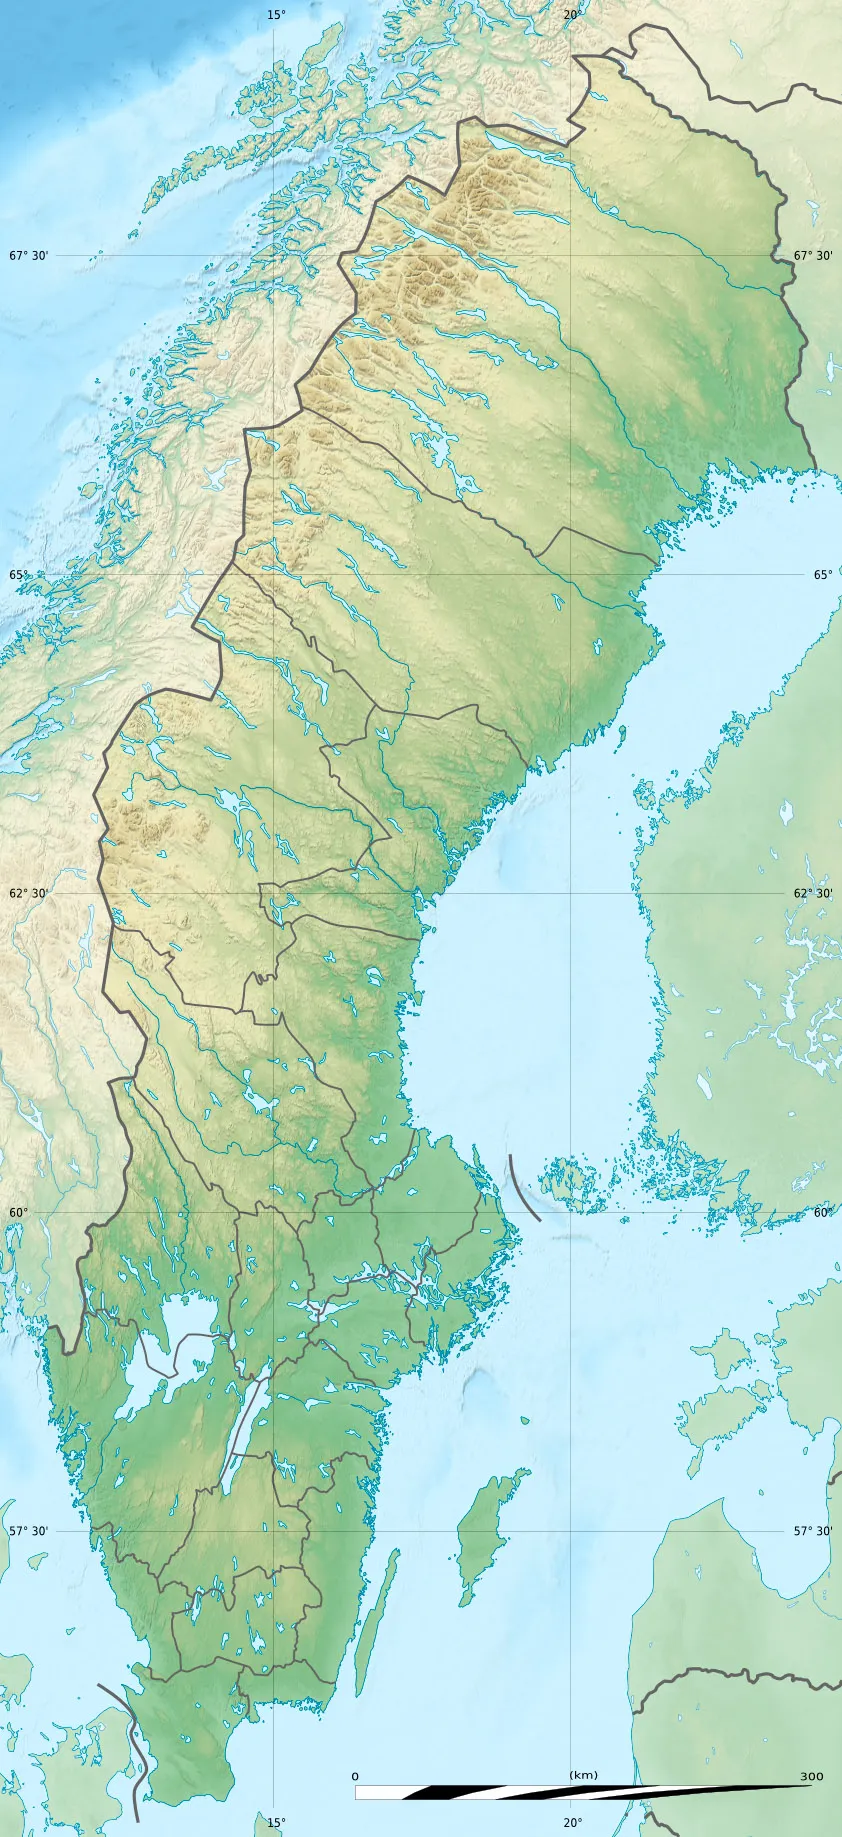 Photo showing: Blank relief location map of Sweden